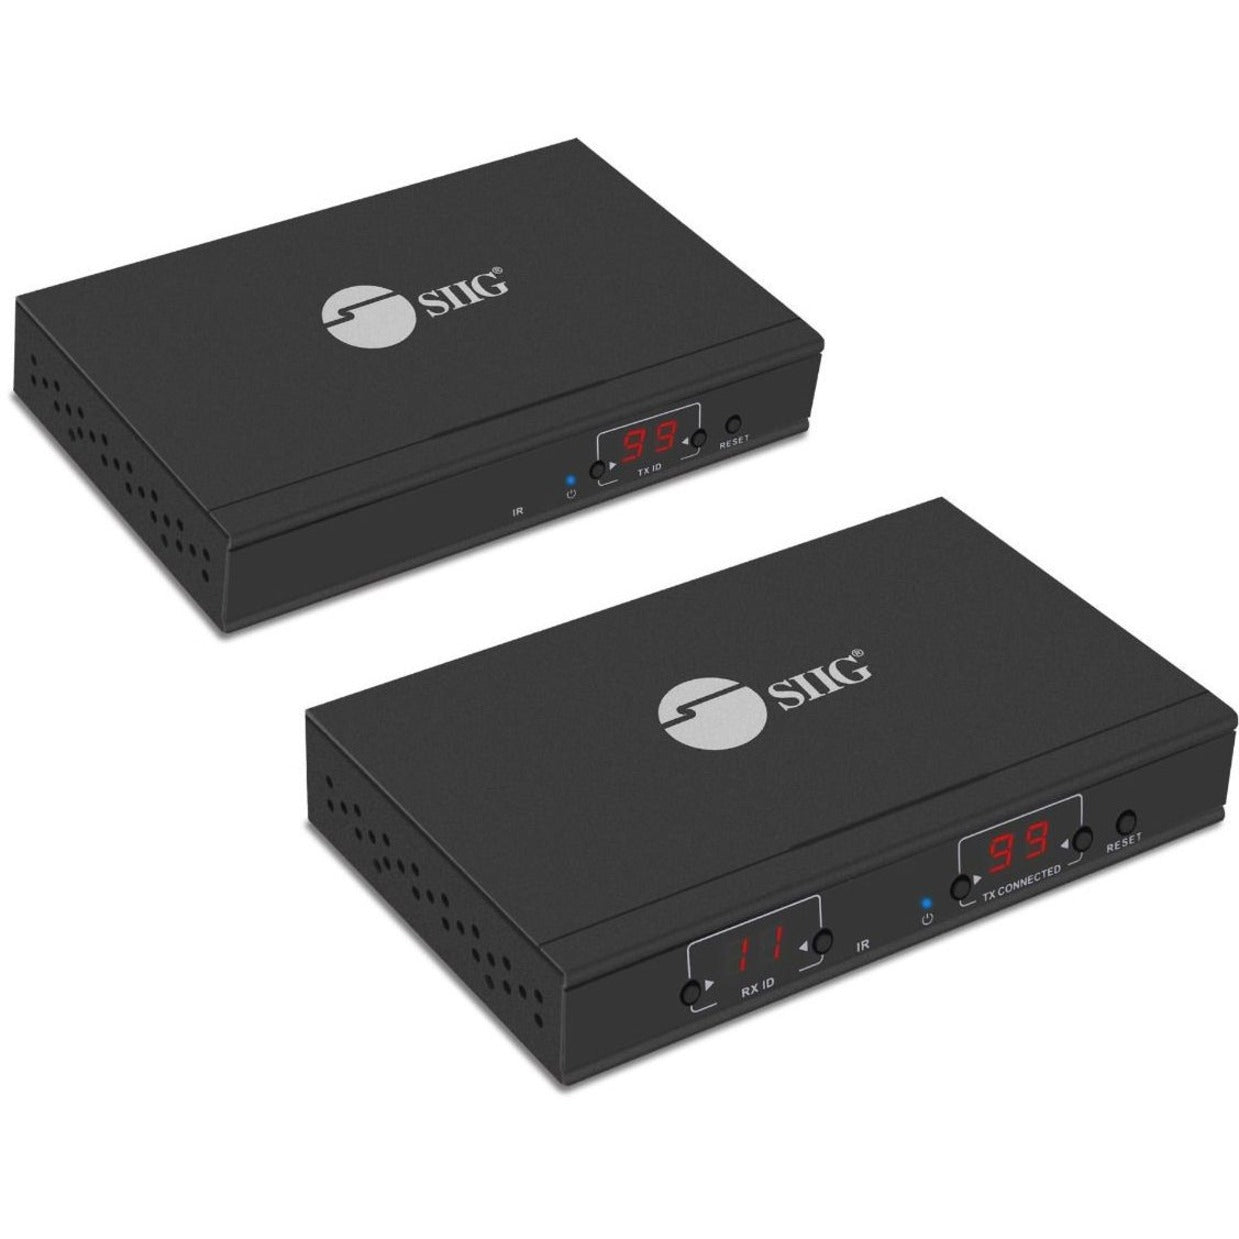 SIIG CE-H23A11-S2 HDMI Over IP Extender with IR - Kit, Full HD 1080p Video Extender Transmitter/Receiver, 2 Year Warranty